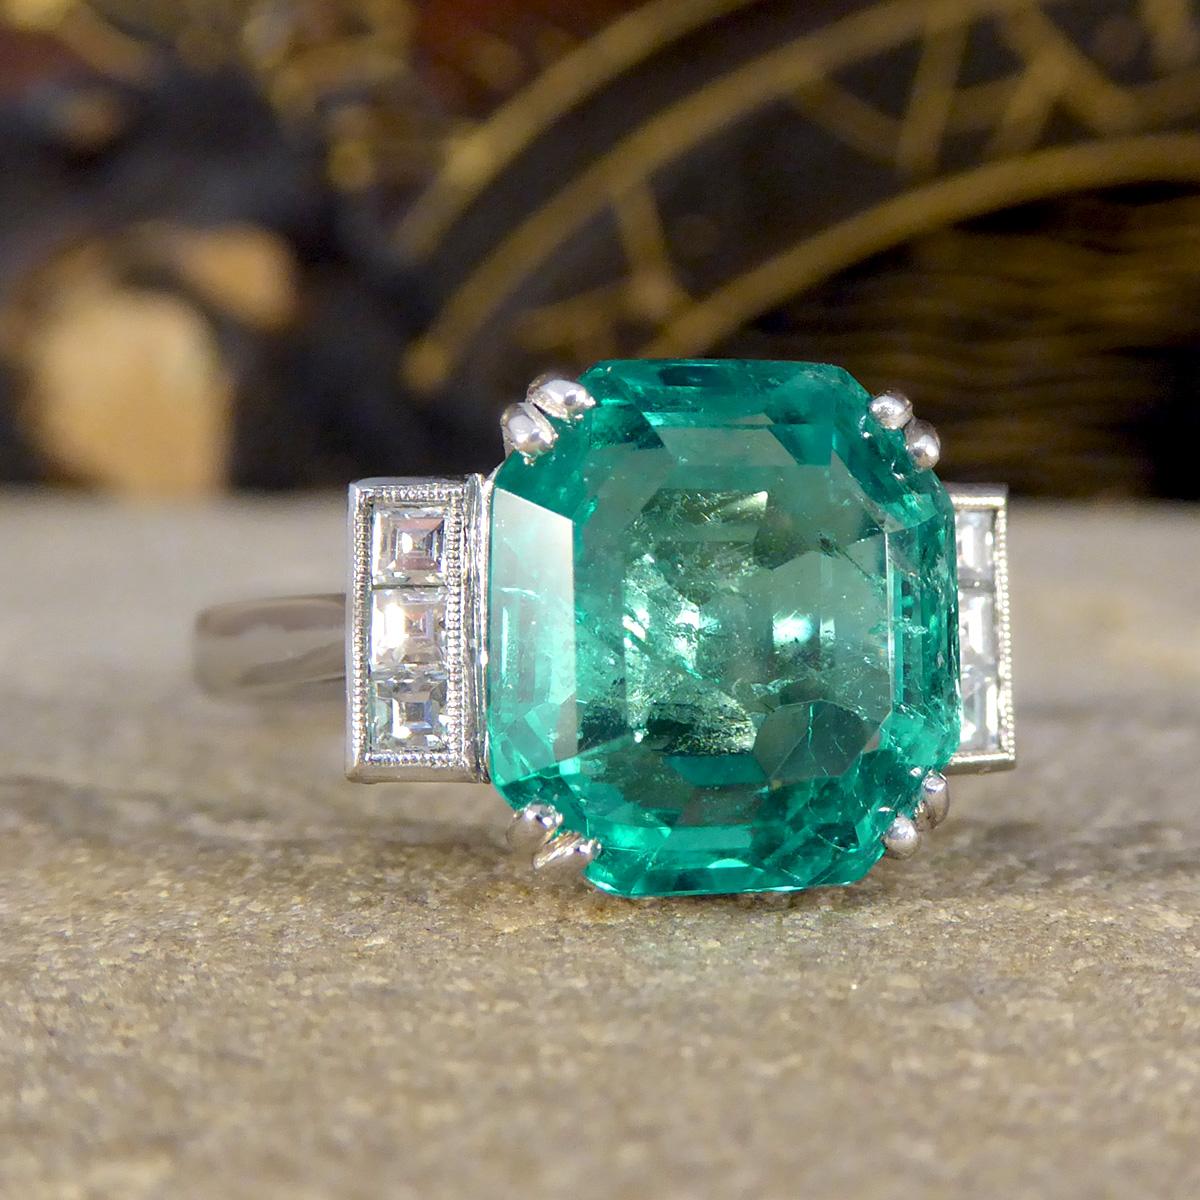 Introducing our exquisite 6.19ct Octagonal Cut Colombian Emerald Ring, a masterpiece of refined elegance and timeless design. At the heart of this luxurious piece is a magnificent, bright, and vibrant Colombian emerald, showcasing an impressive 6.19